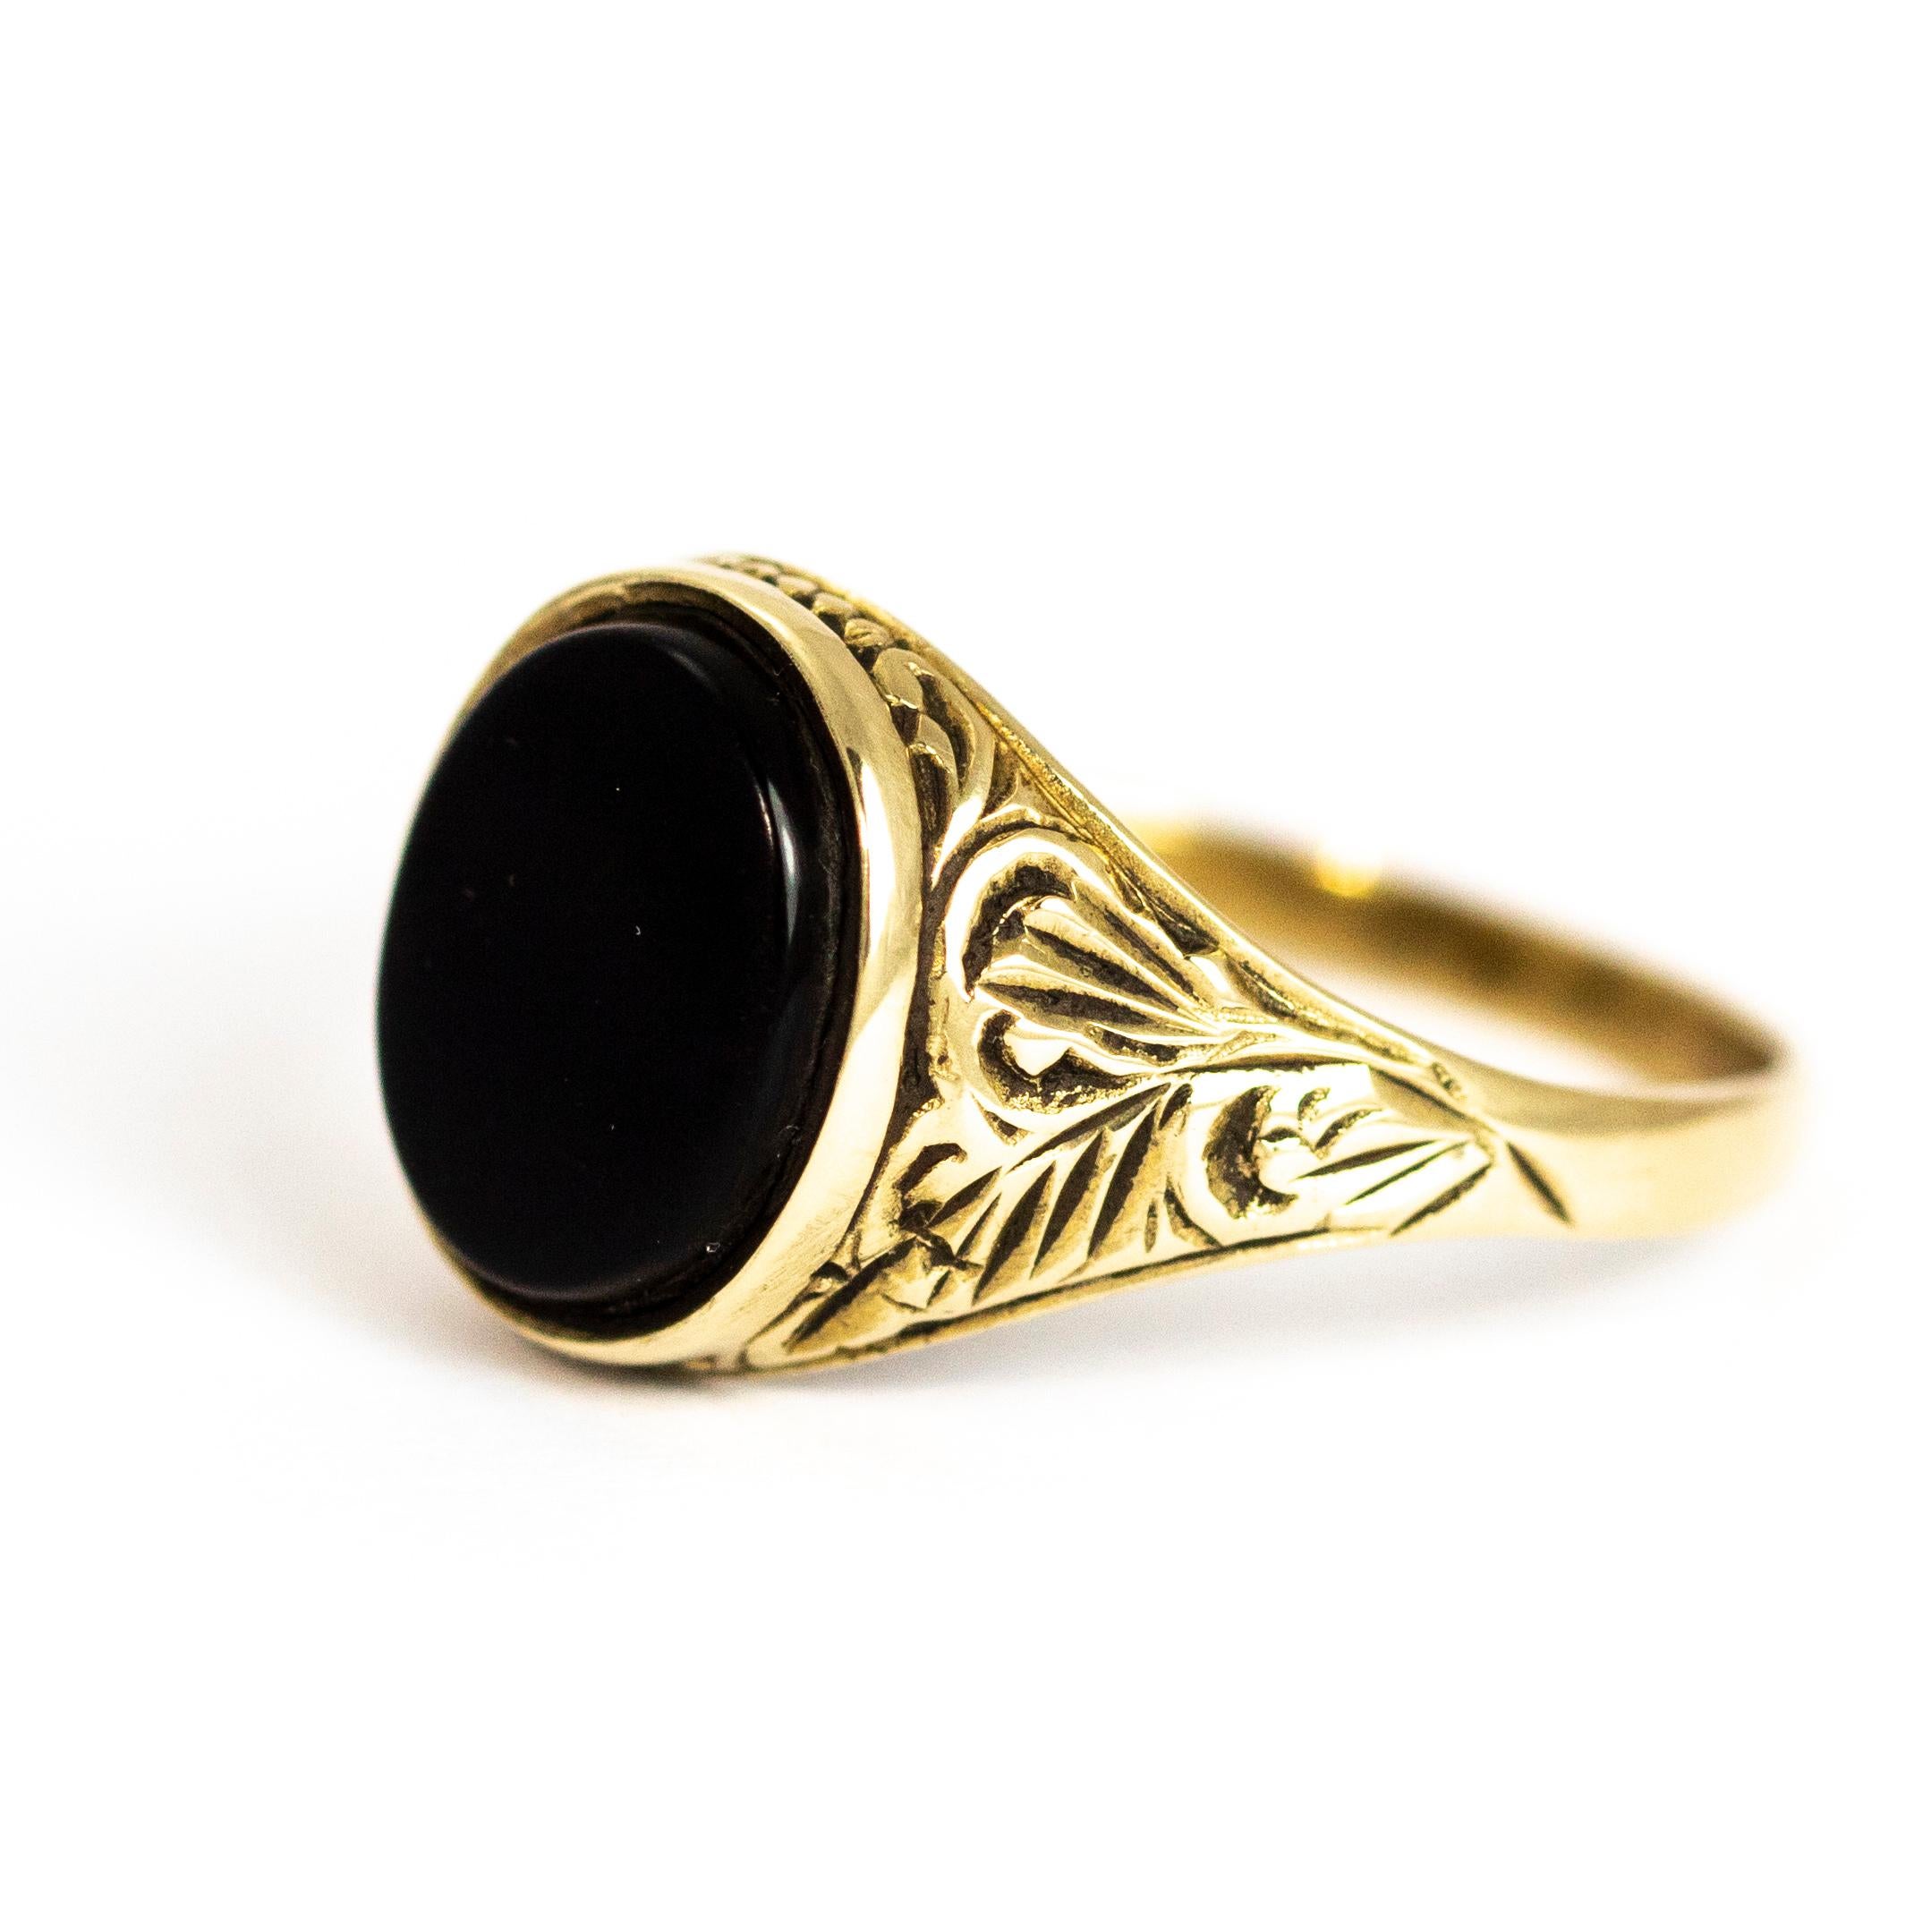 A superb vintage signet ring set with a fine flat-cut oval onyx. The shoulders around the gemstone have a brilliant ornate hand-chased design. Modelled in 9 karat yellow gold.

Ring Size: UK U 1/2, US 10 1/2

Height: 13.34 mm 